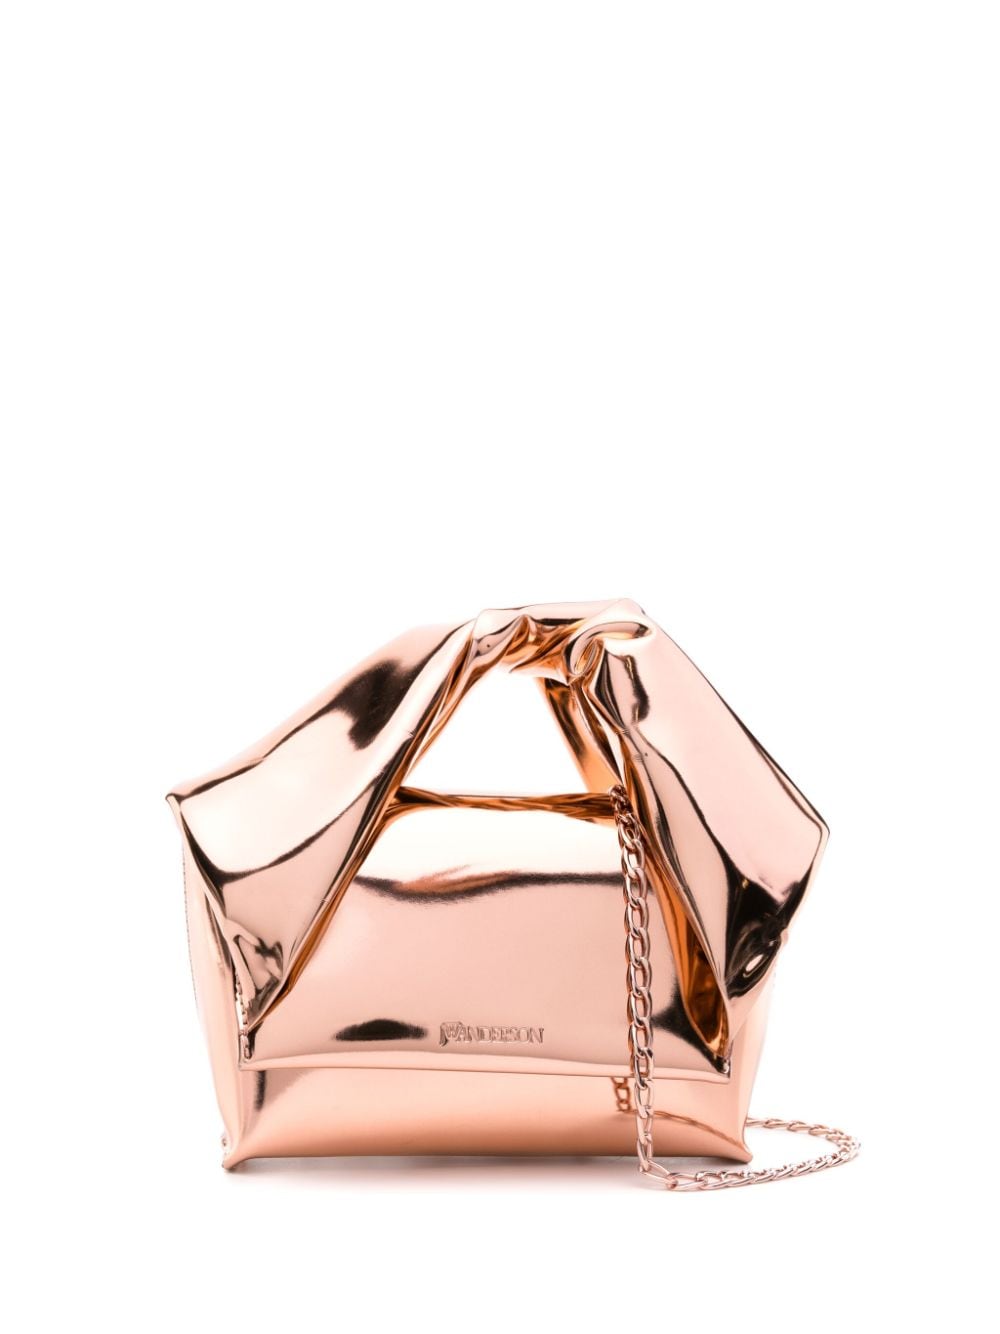 JW Anderson small Twister tote bag - Pink von JW Anderson